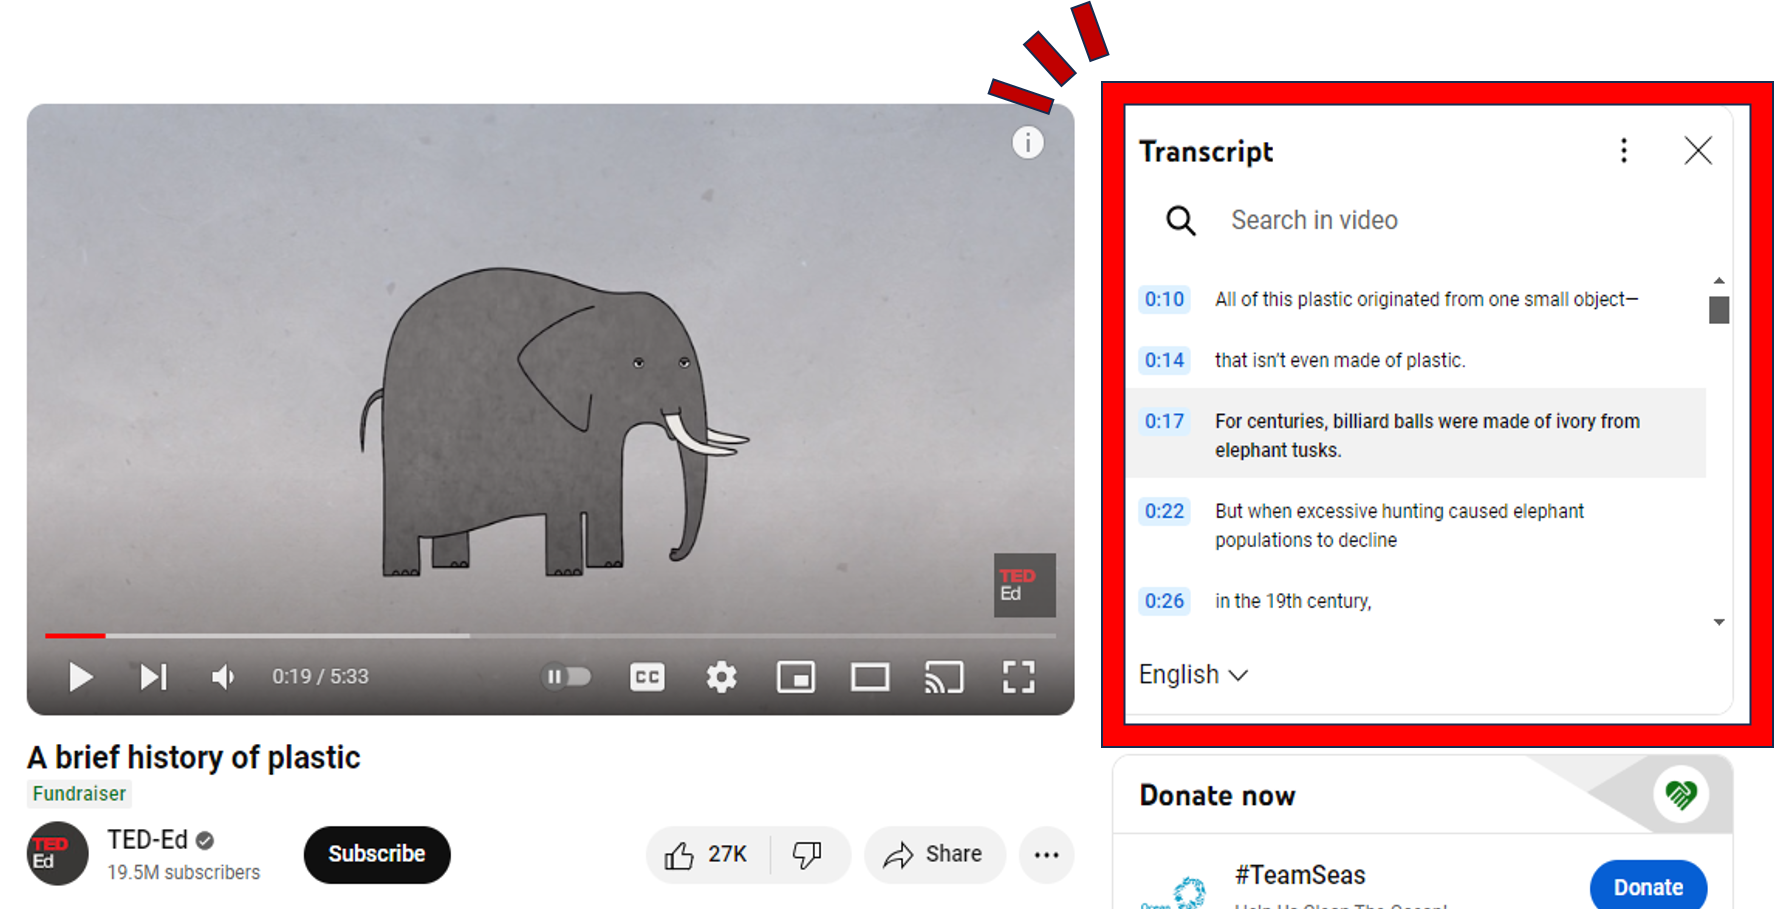 Screenshot of a youtube video with the red rectangle around the transcript box